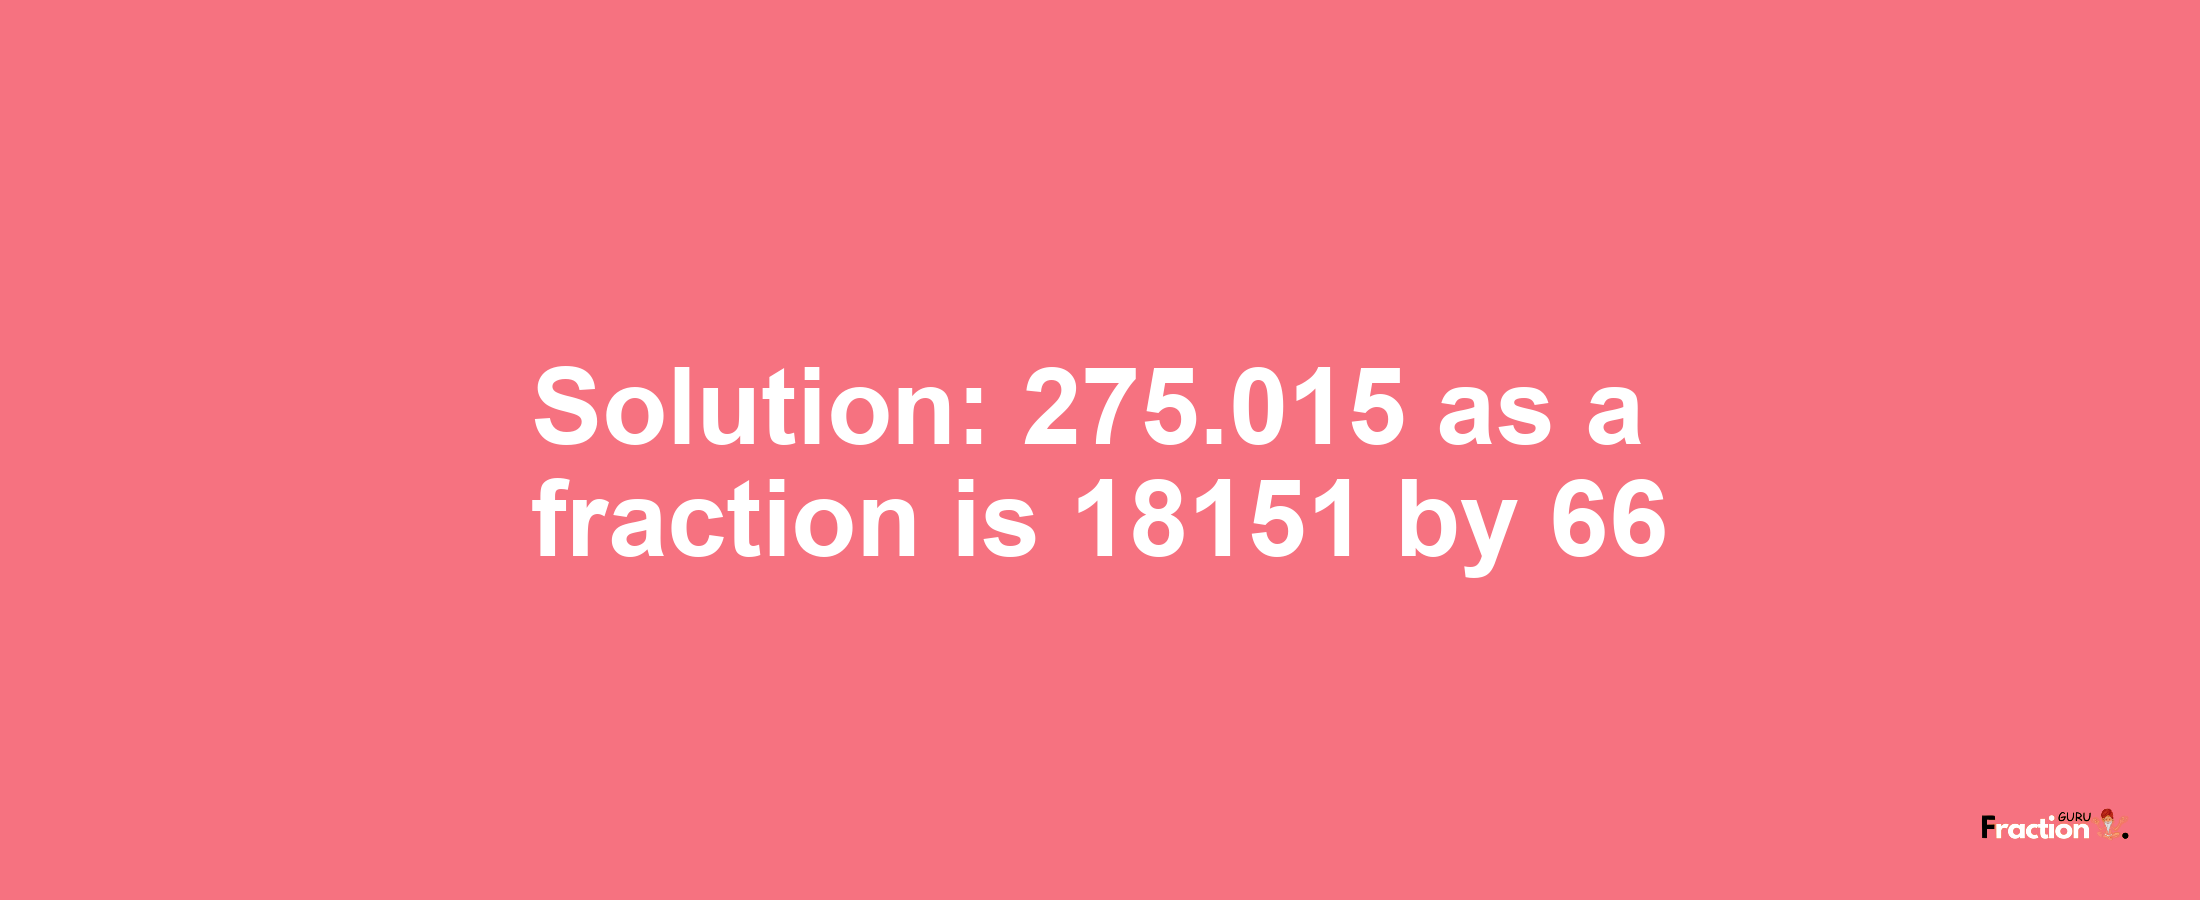 Solution:275.015 as a fraction is 18151/66